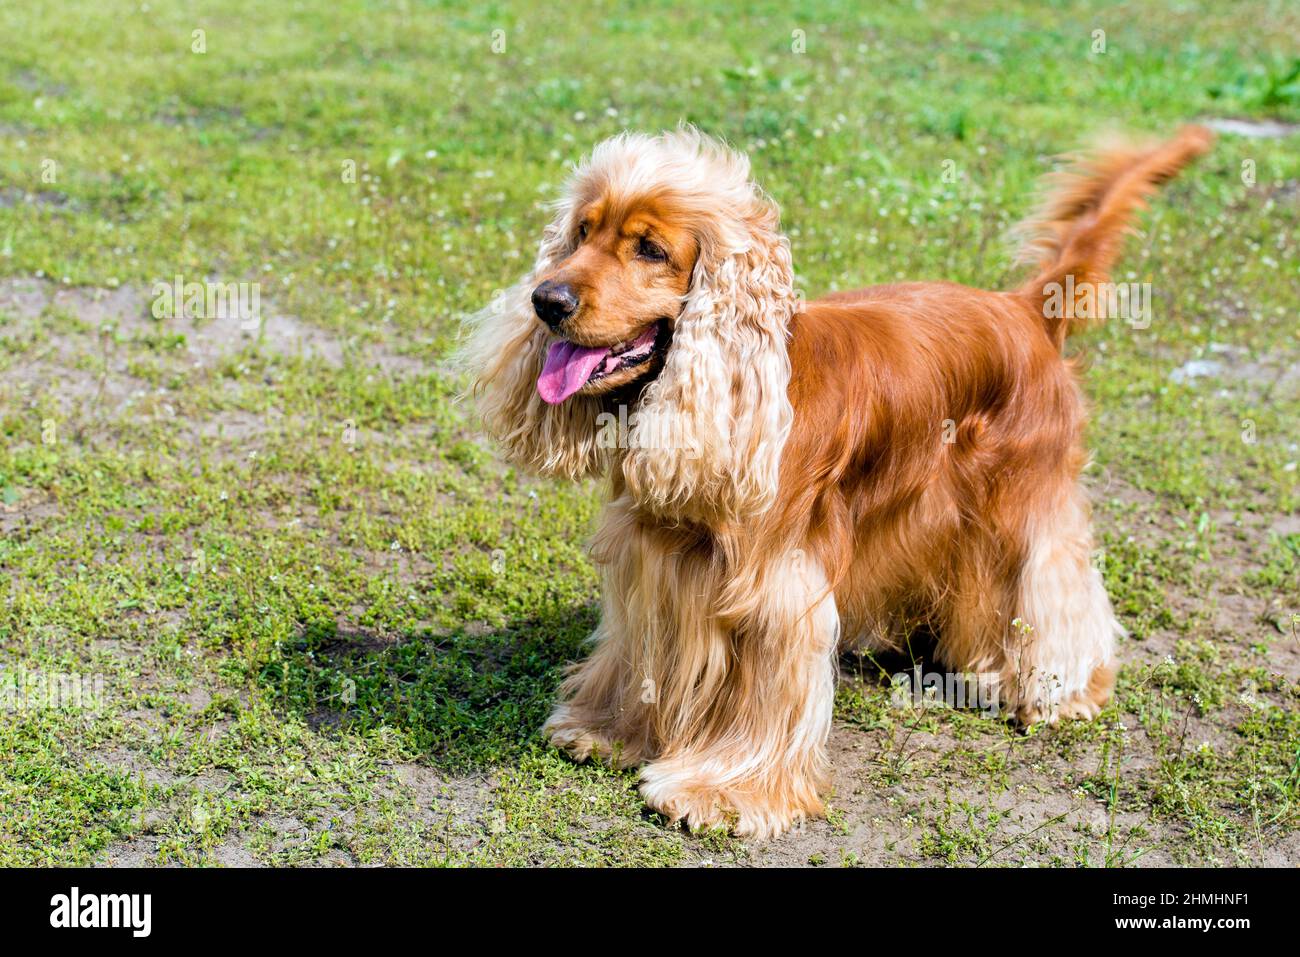 Cocker Spaniel stands. The English Cocker Spaniel is on the grass. Stock Photo